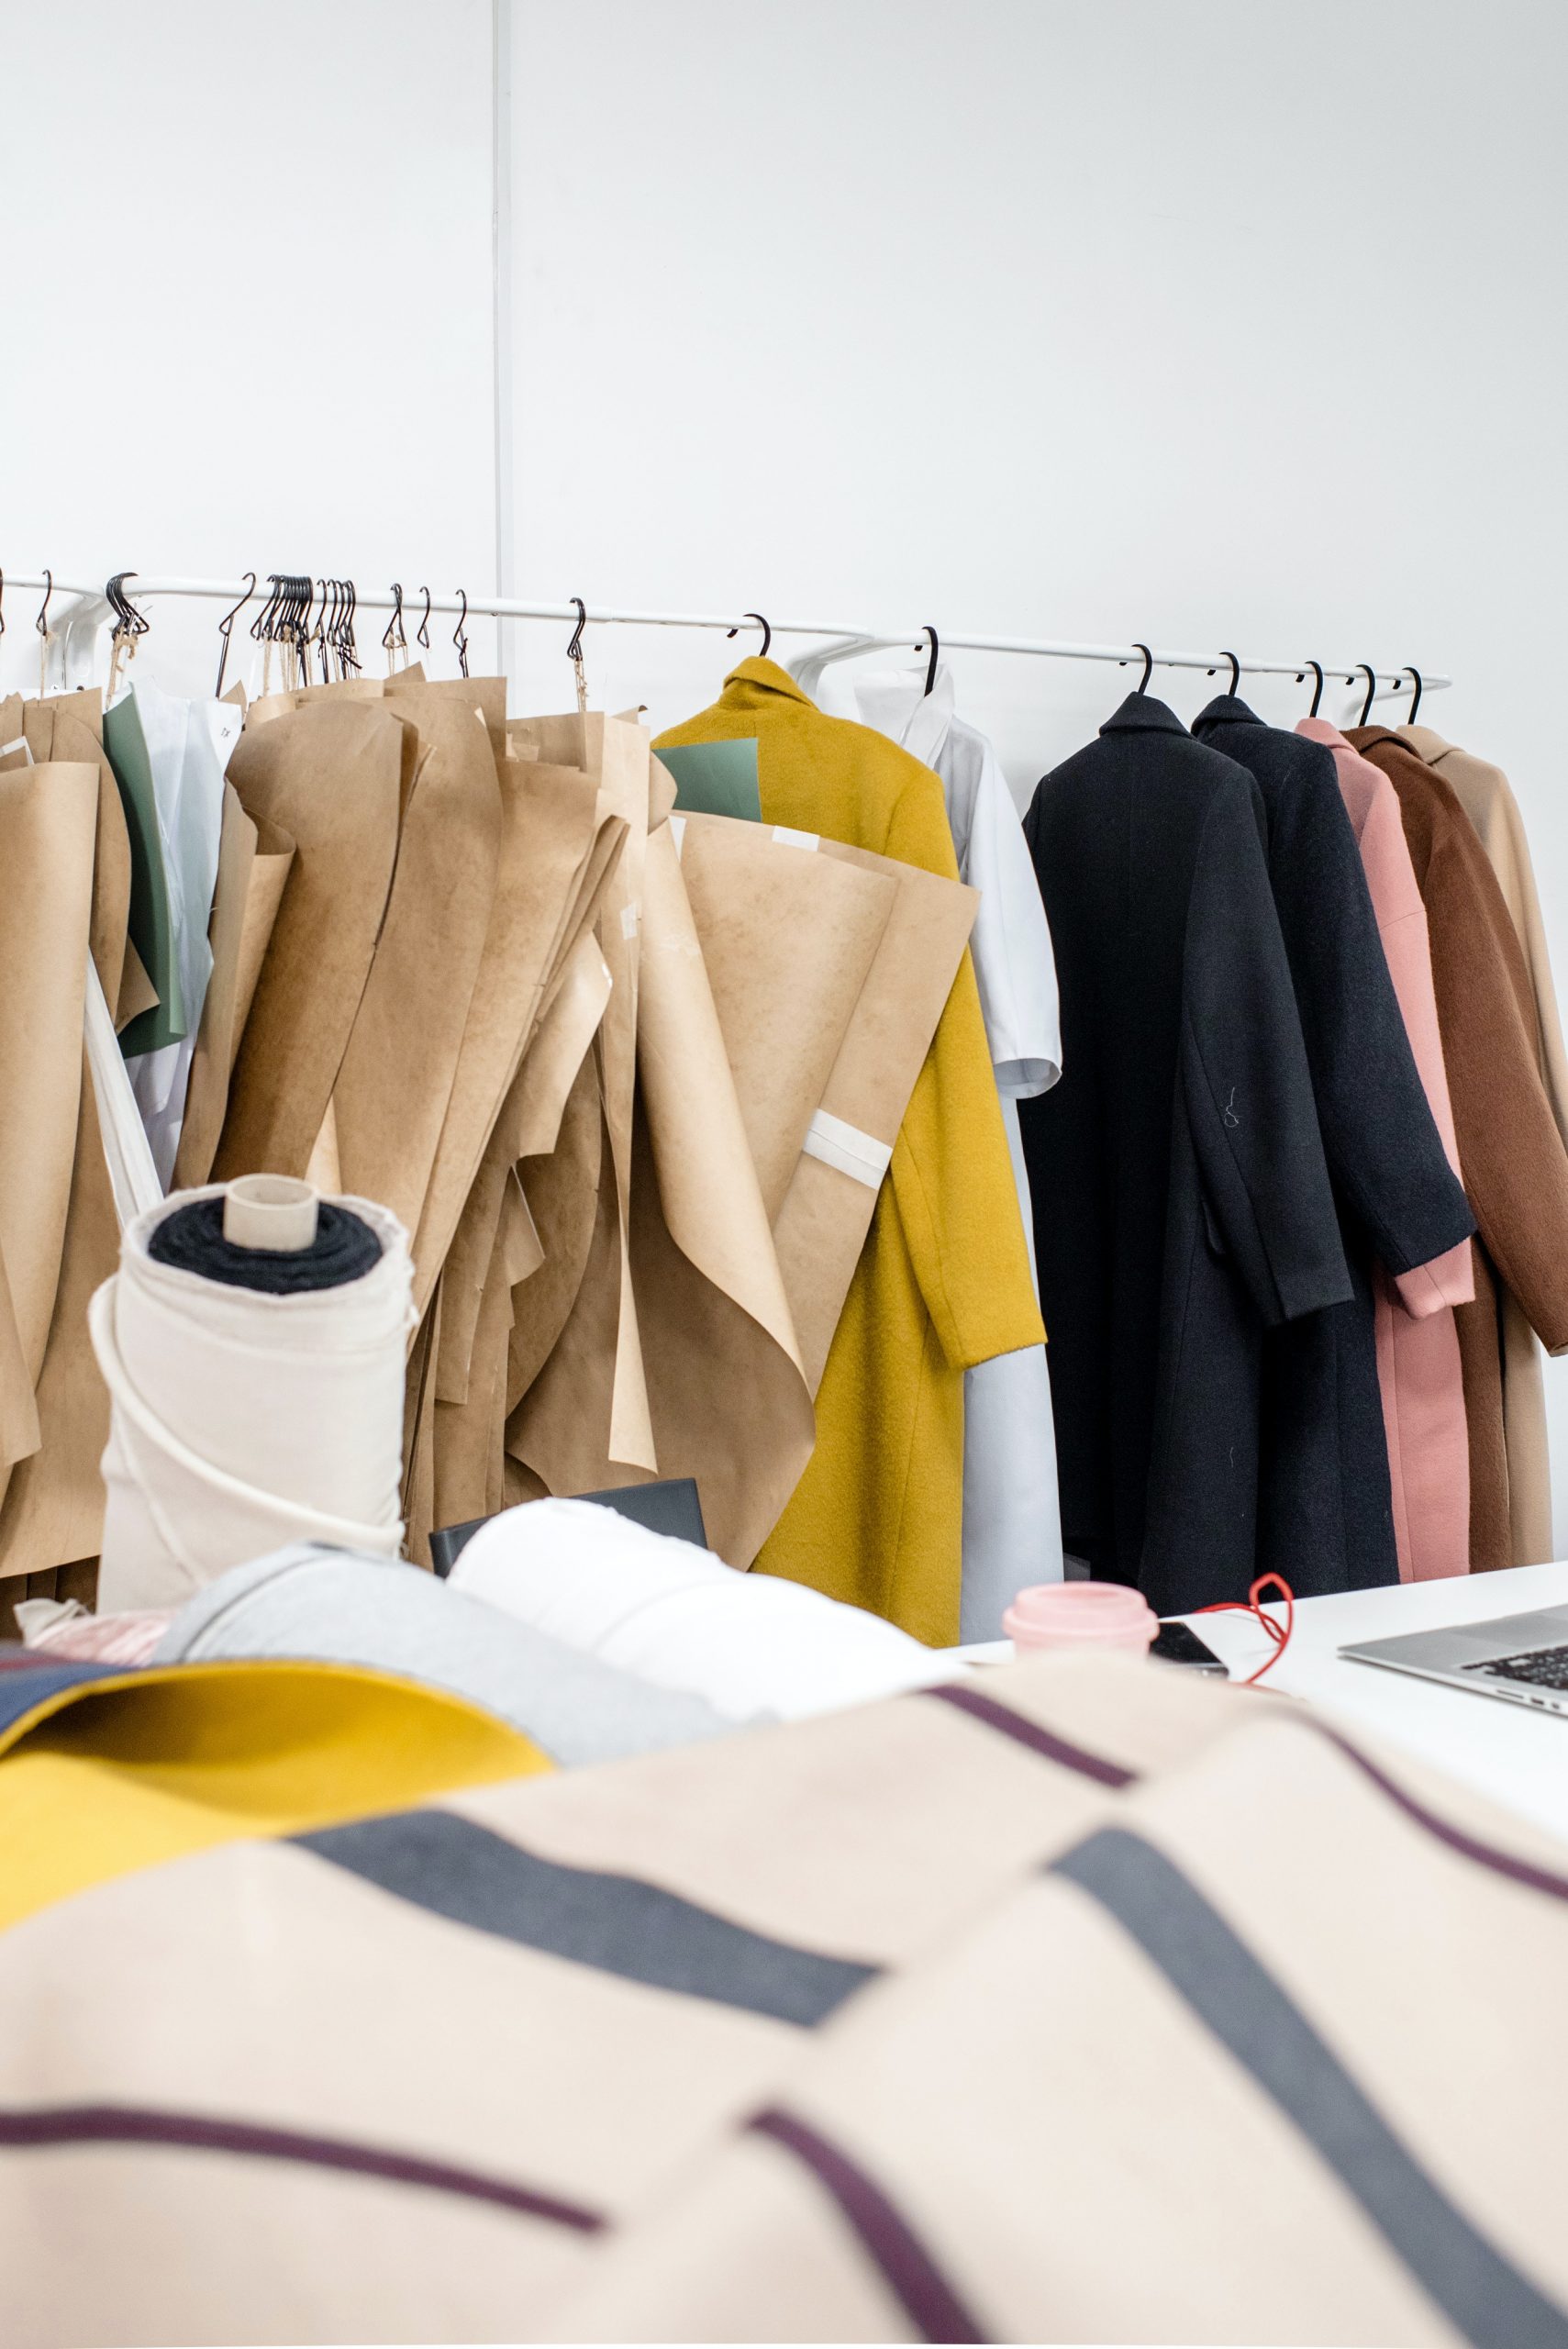 Find your fashion brand niche with 5 simple steps